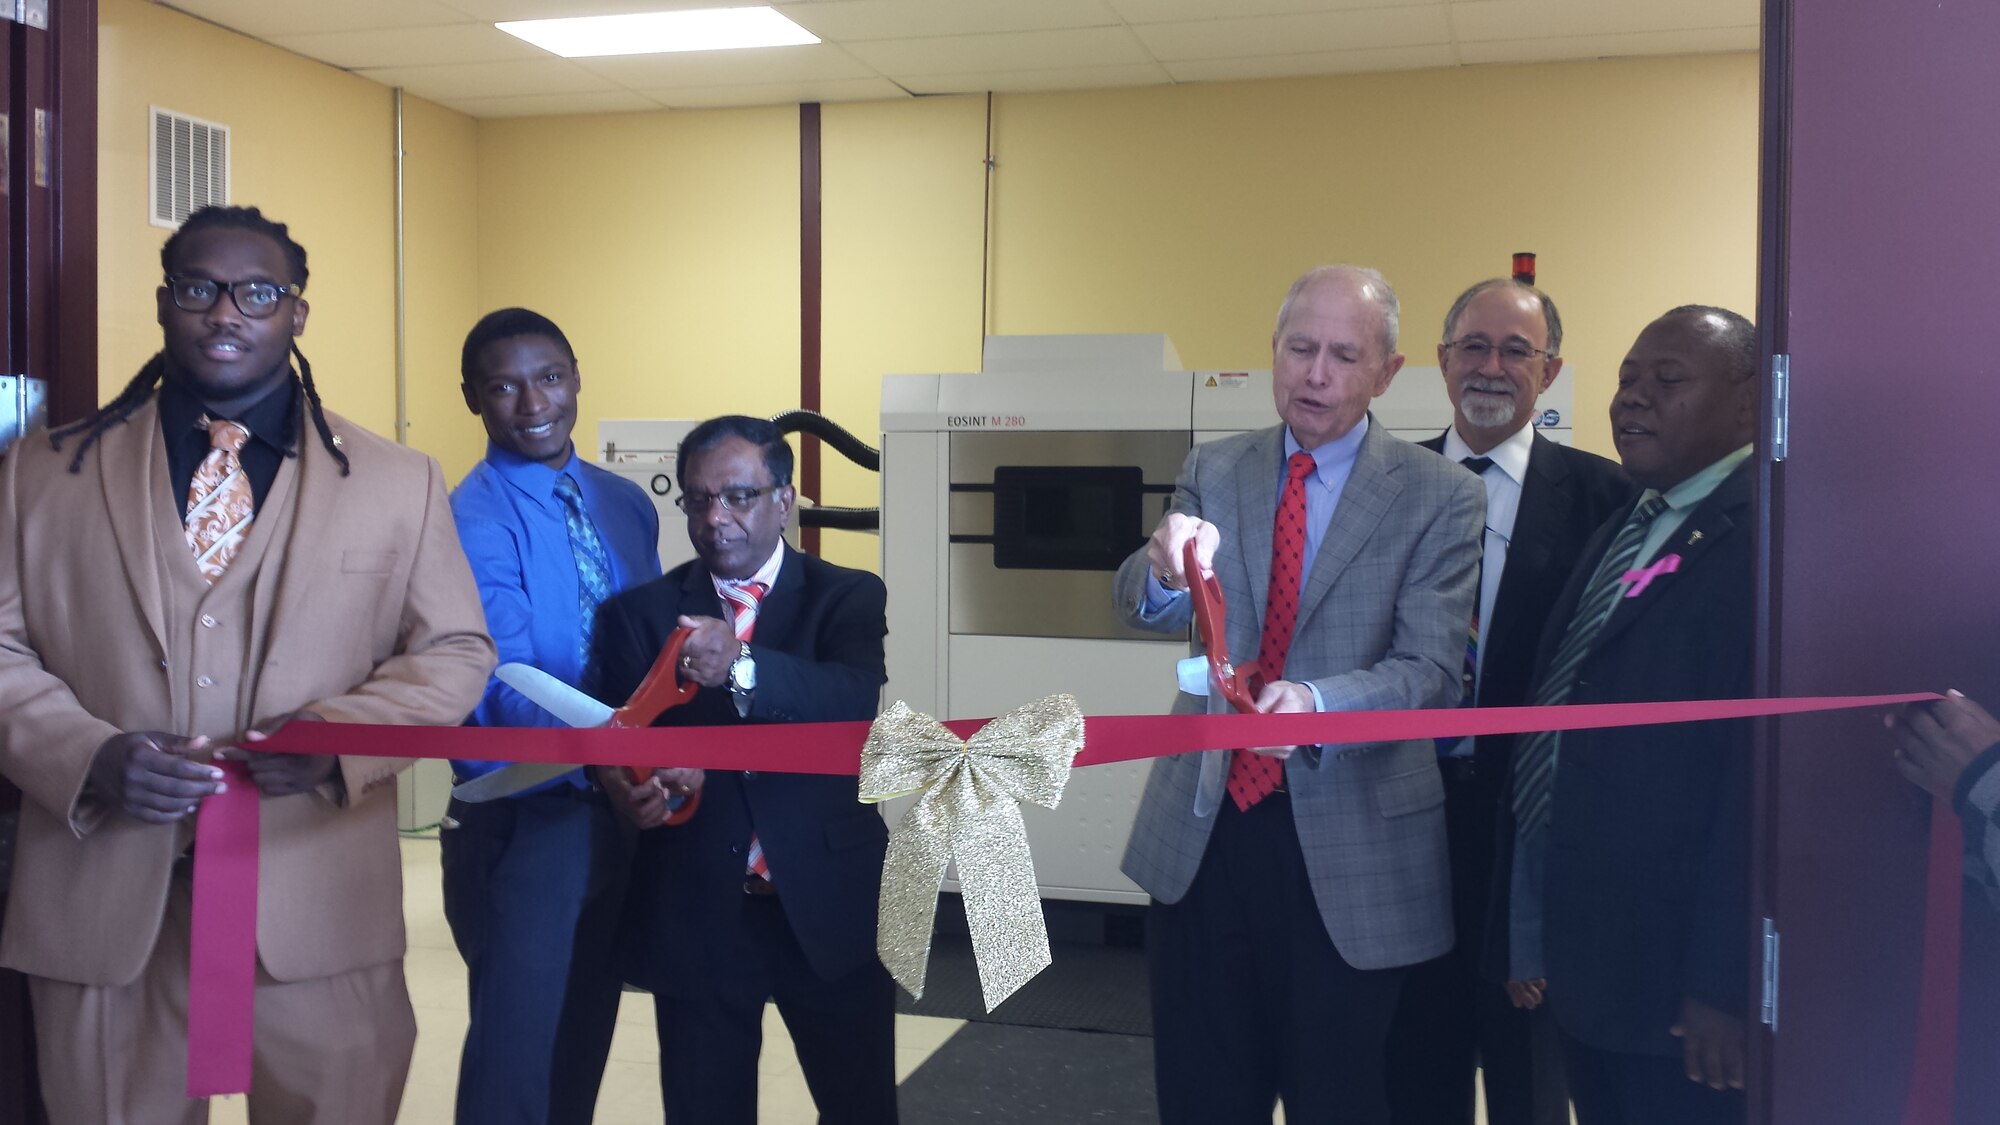 The Air Force Research Laboratory, Central State University (CSU), and Universal Technology Corporation (UTC) cut the ribbon for the new Additive Manufacturing Laboratory, making CSU the first university in the region with metal additive manufacturing capability.  Pictured from left to right are CSU students Mr. Jamal Robinson and Mr. Priestly Schuler, Dr. Subramania Sritharan (Dean of Science and Engineering, CSU), Dr. Charles Browning (Chairperson, Department of Chemical and Materials Engineering, University of Dayton), Mr. Joe Sciabica (President, UTC), and Dr. Charles Wesley Ford, Jr. (Provost and VP, CSU).  (Photo courtesy of Central State University)